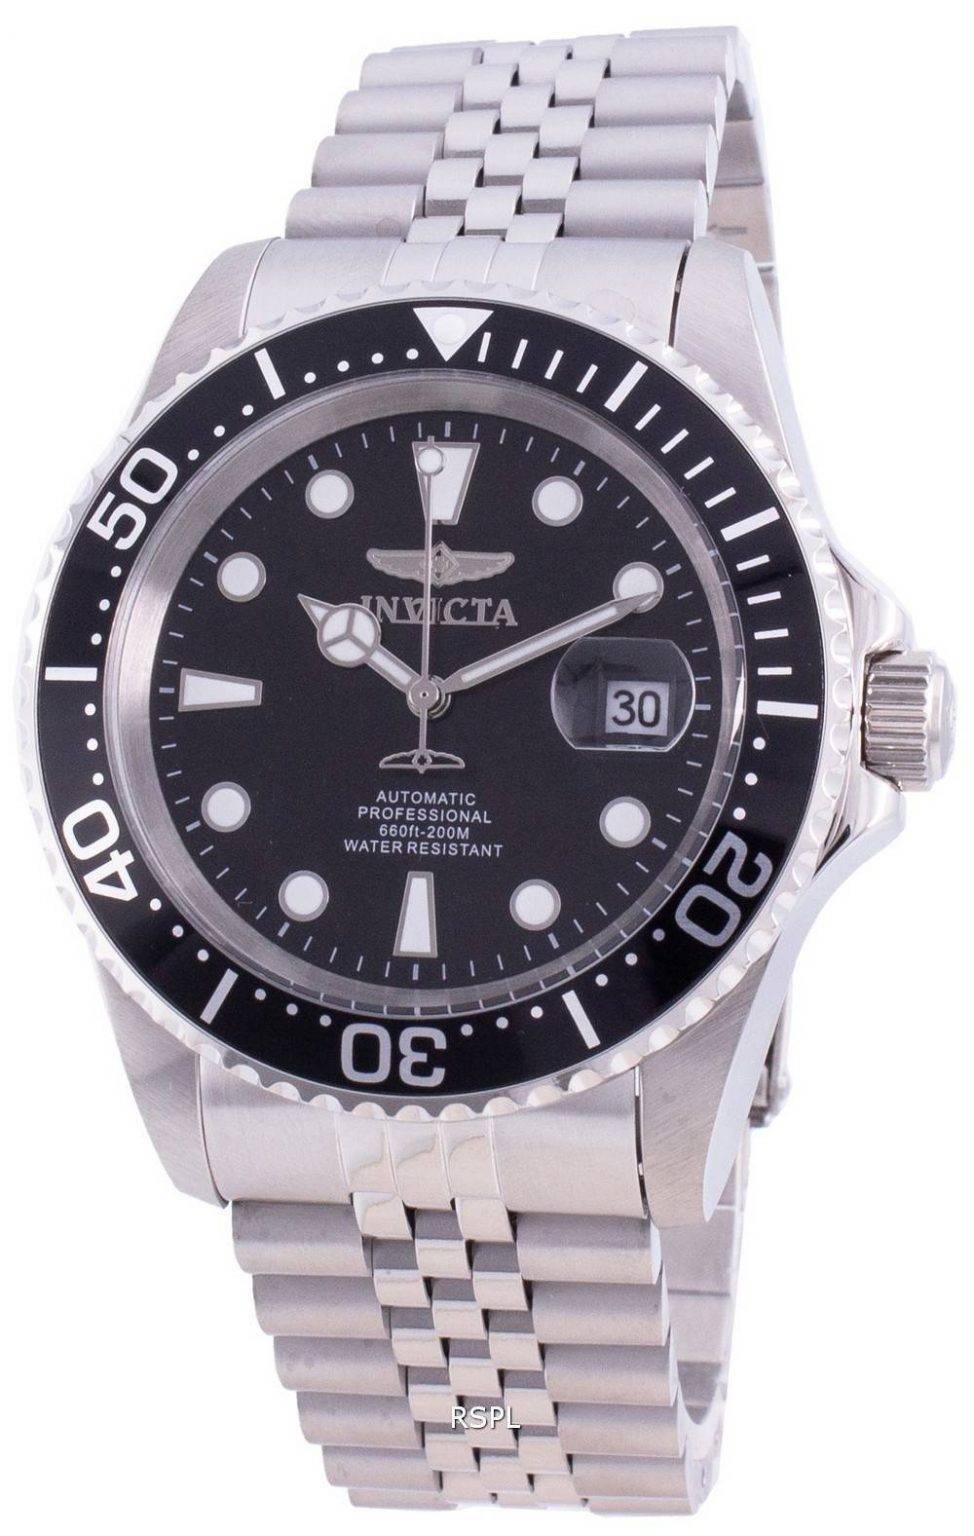 Invicta Watches - Invicta Watches For Sale | Downunderwatches.com